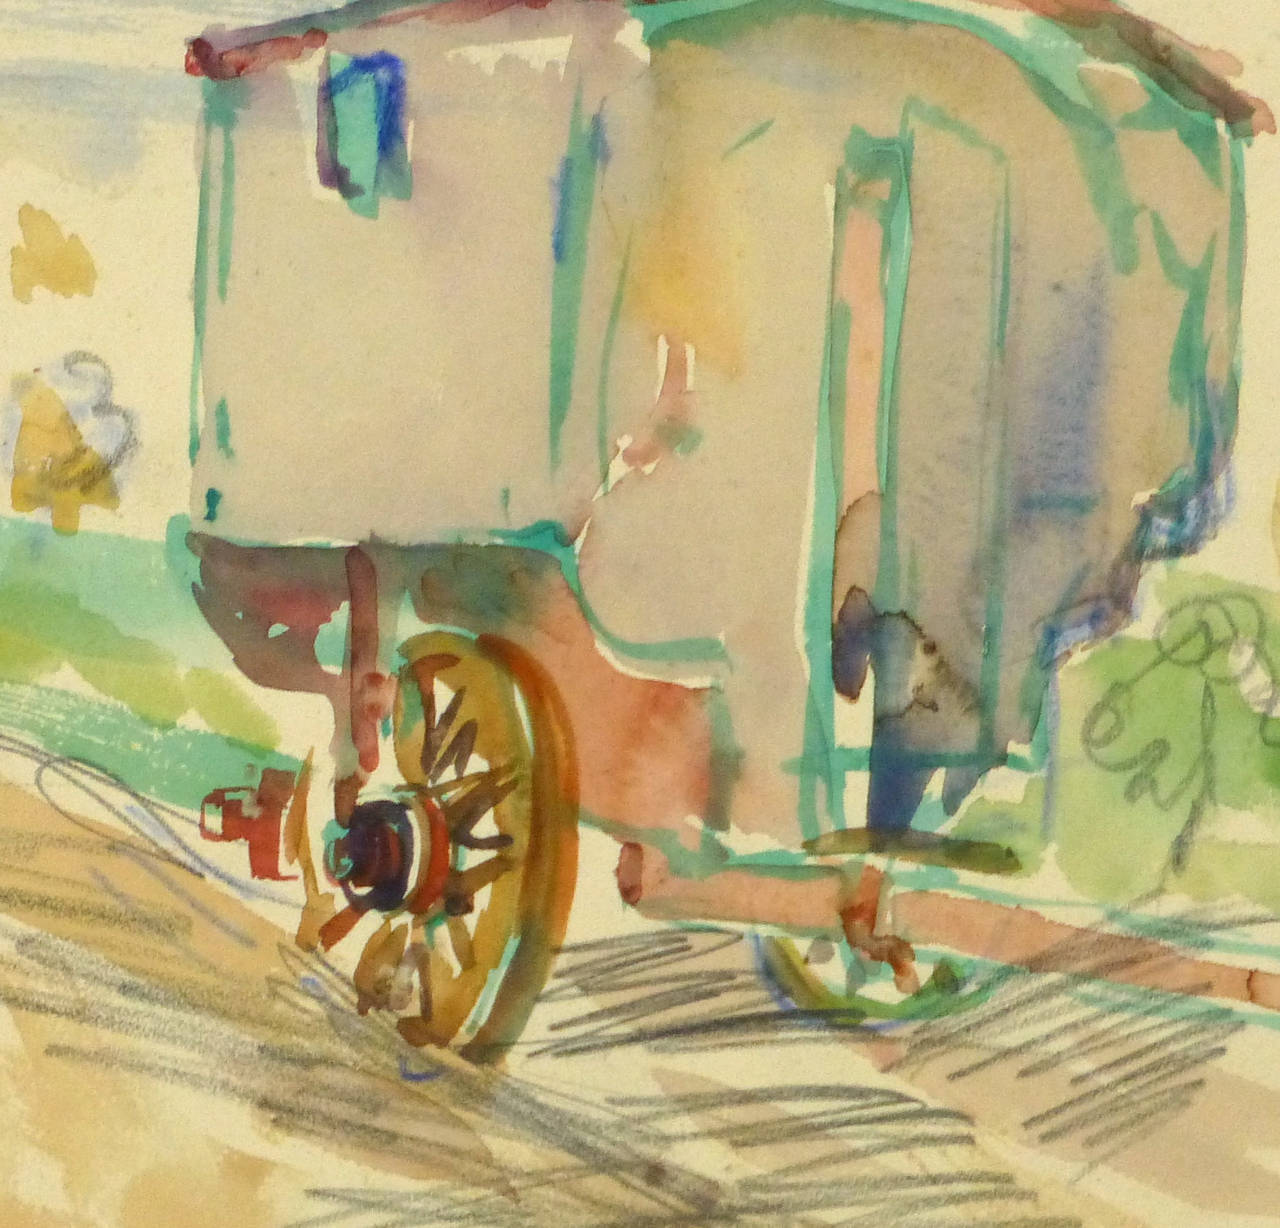 Expertly rendered watercolor and ink painting of a small gypsy caravan with a handsome dog sitting alert by artist Kaupisch Von Reppert Irmagard, circa 1950. Initialed and titled lower left.

Original one-of-a-kind vintage work of art on paper